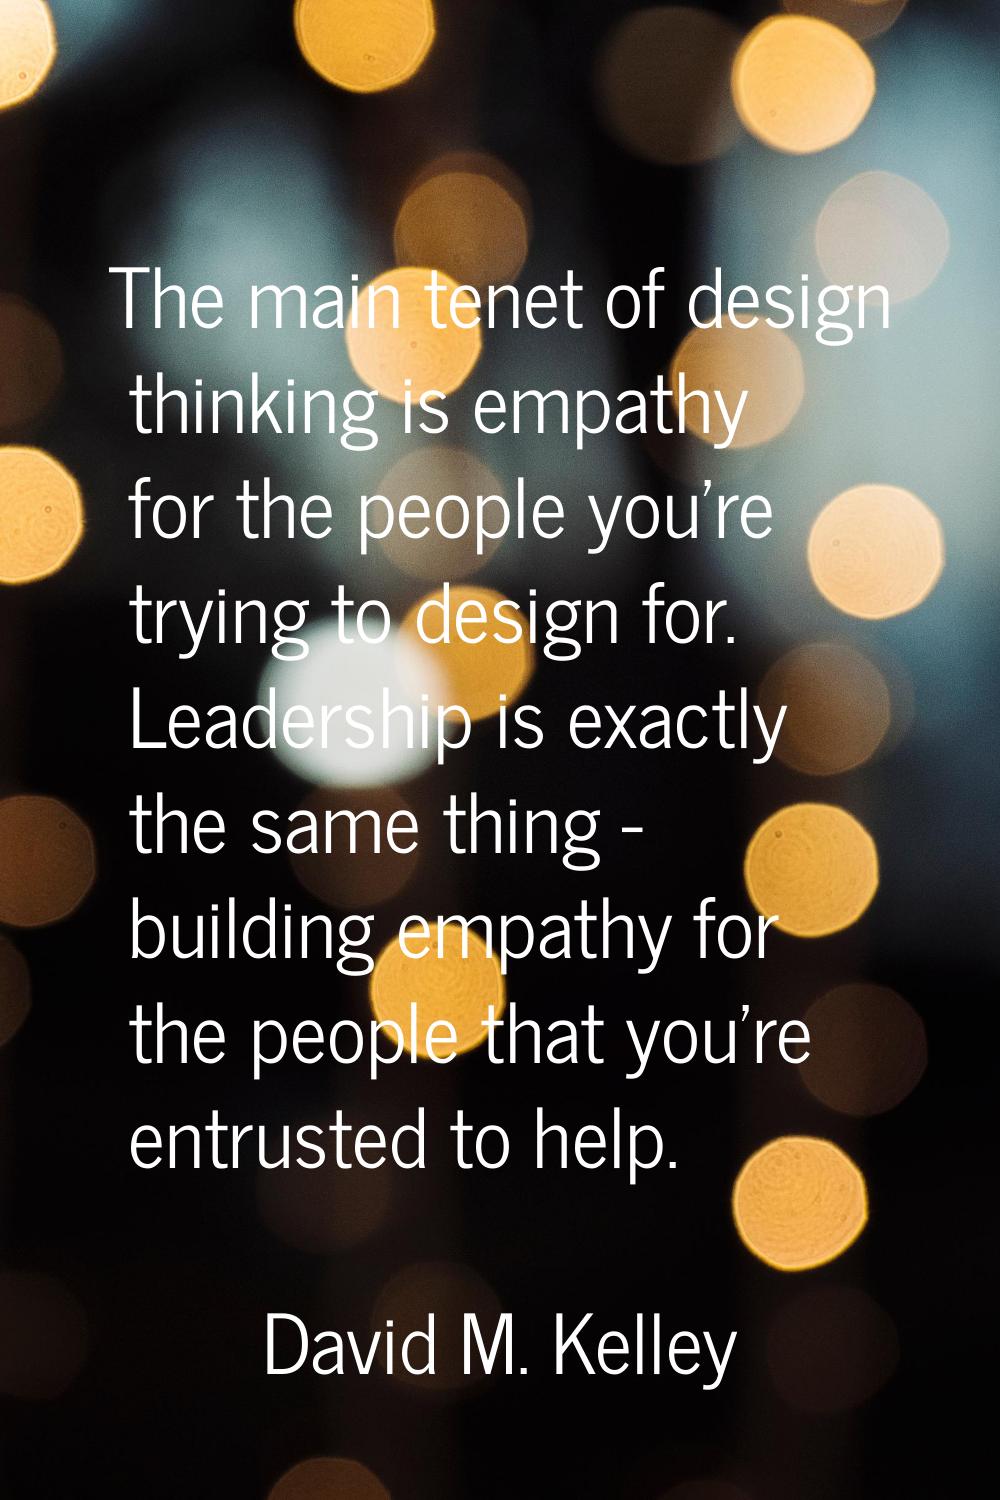 The main tenet of design thinking is empathy for the people you're trying to design for. Leadership